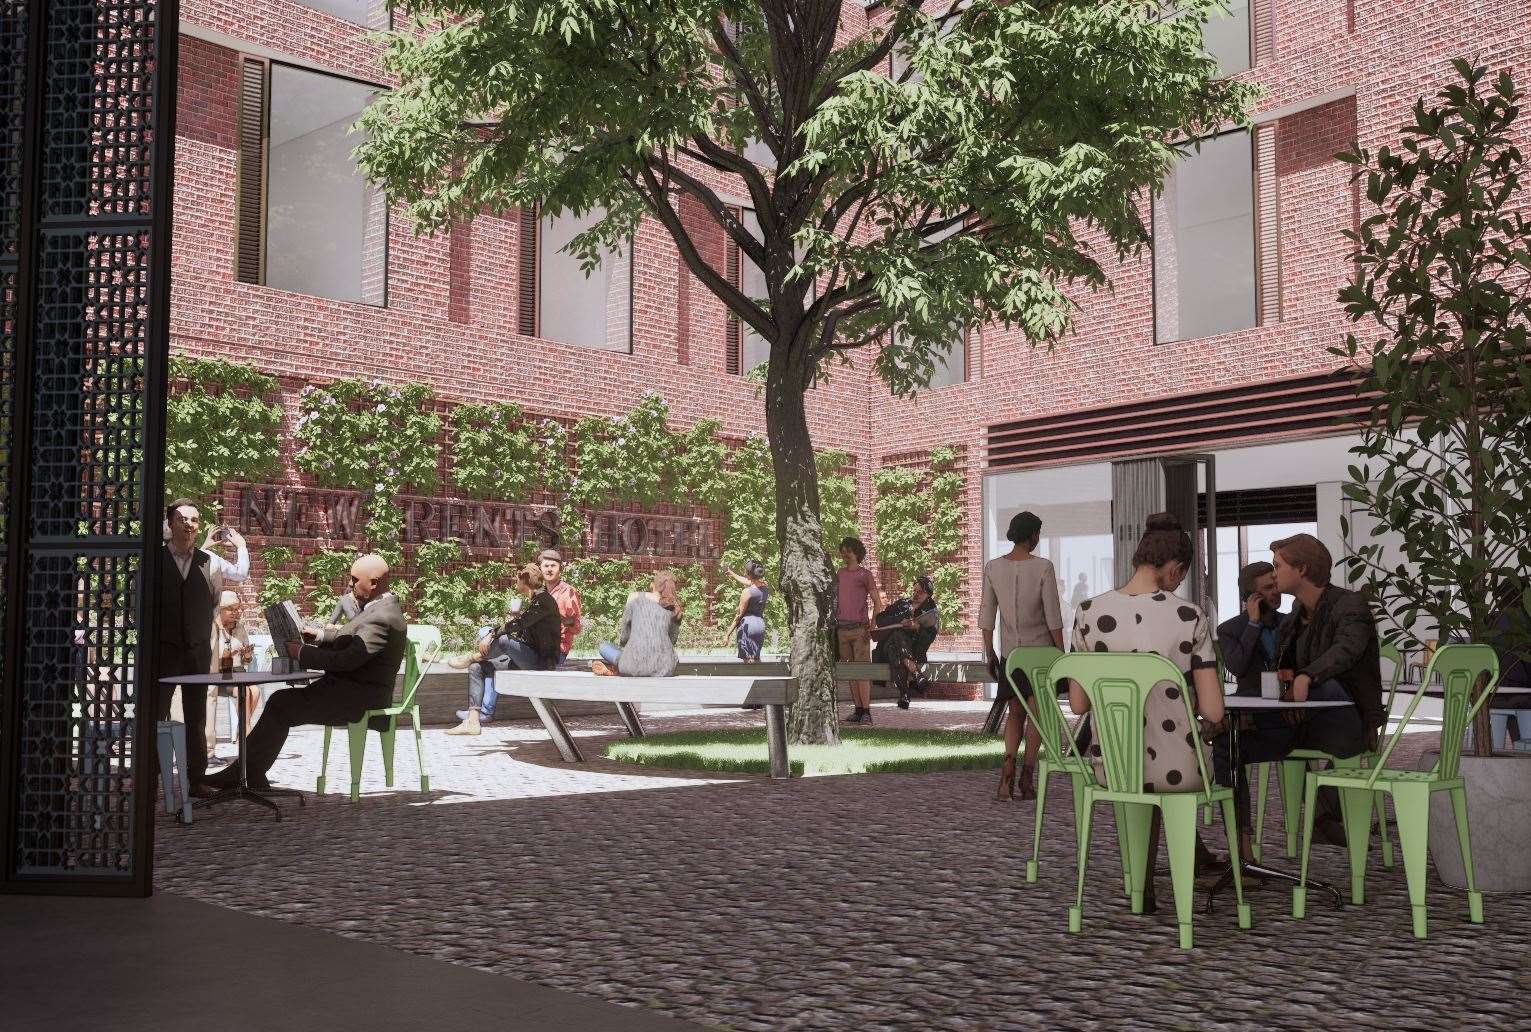 An outdoor area planned for the hotel. Picture: Hollaway